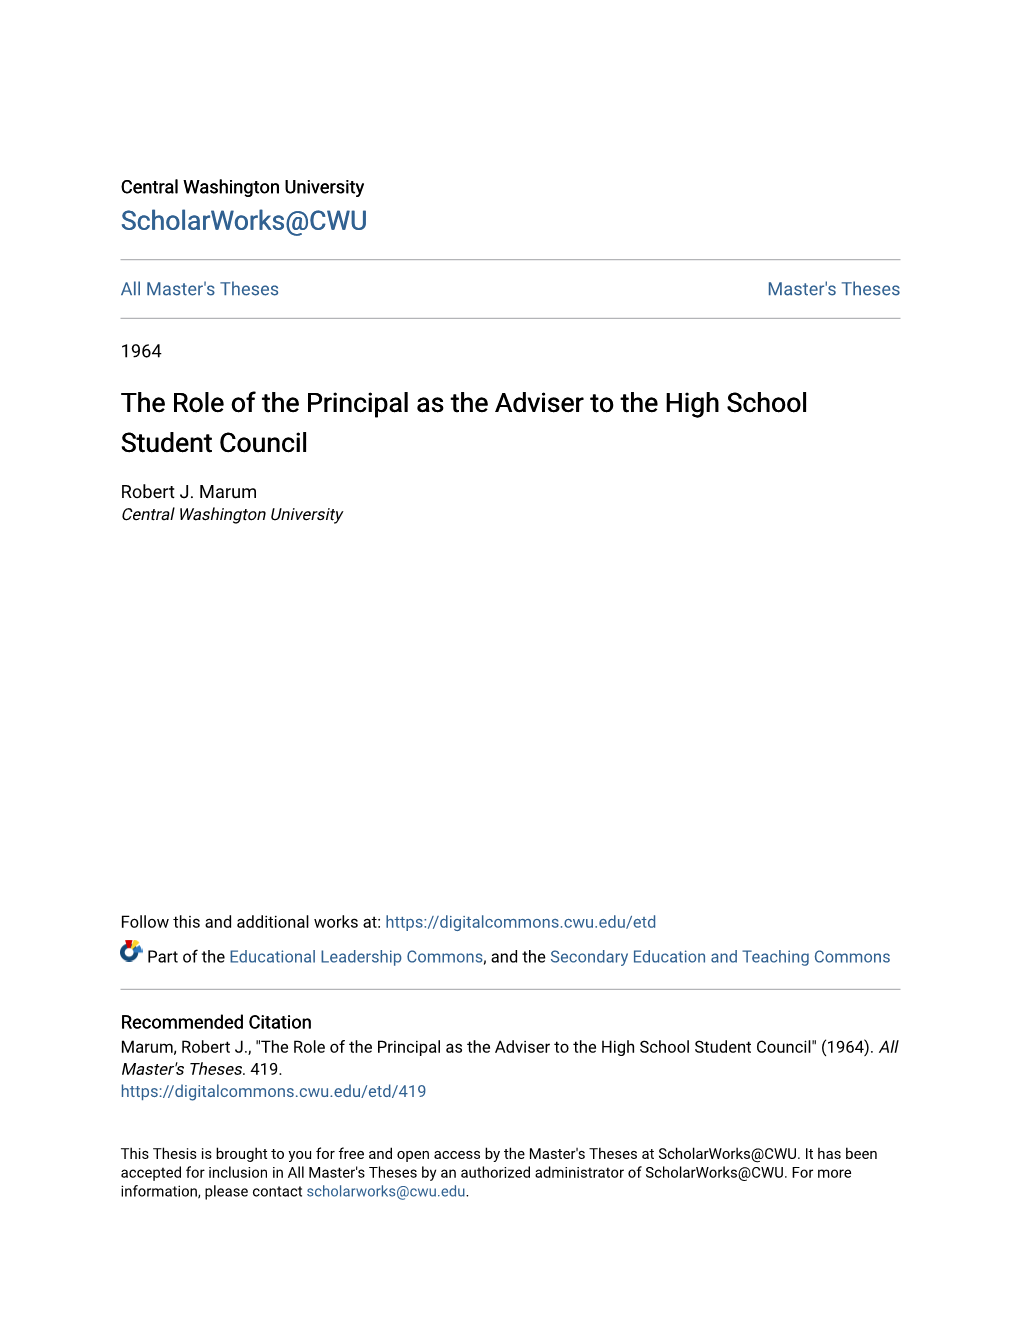 The Role of the Principal As the Adviser to the High School Student Council